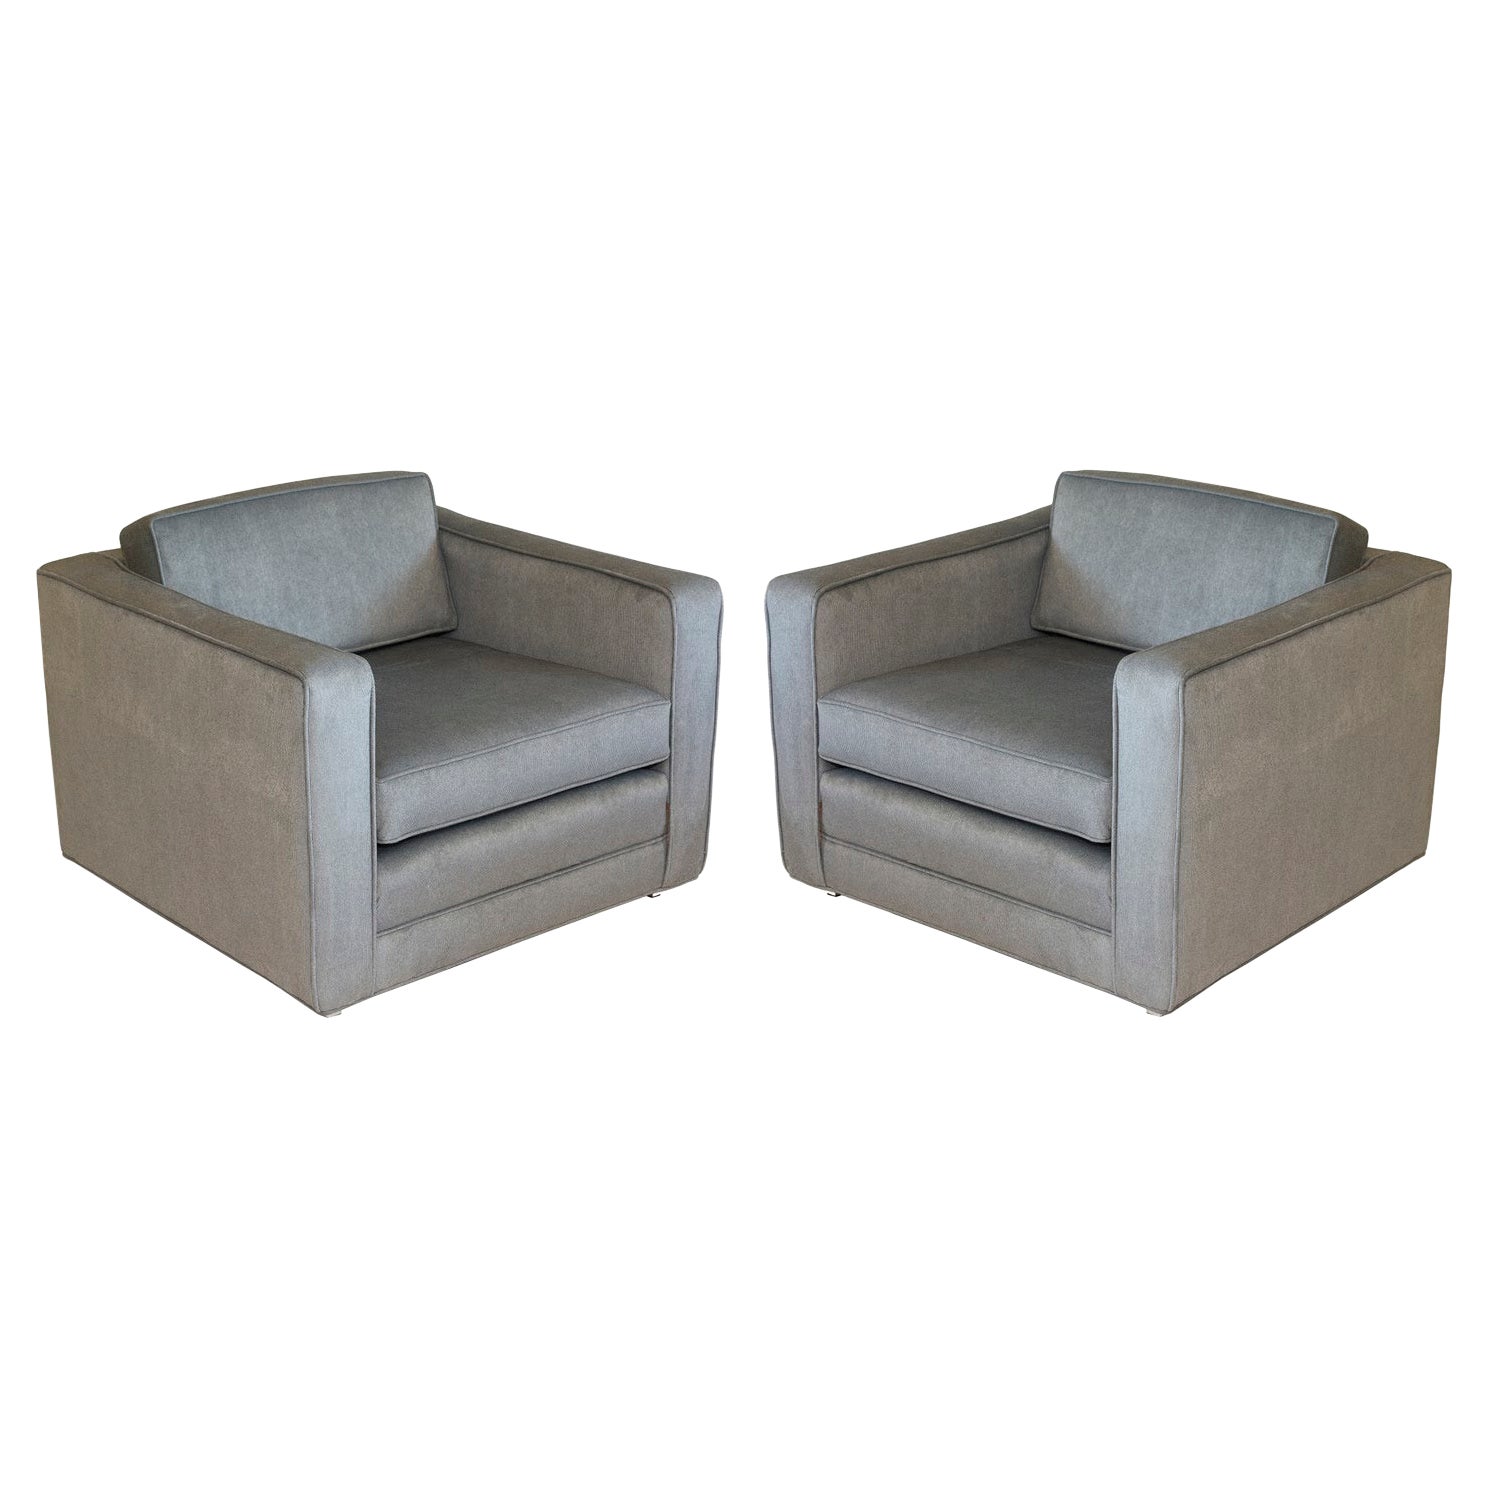 Pair of Charles Pfister Cube Chairs for Knoll